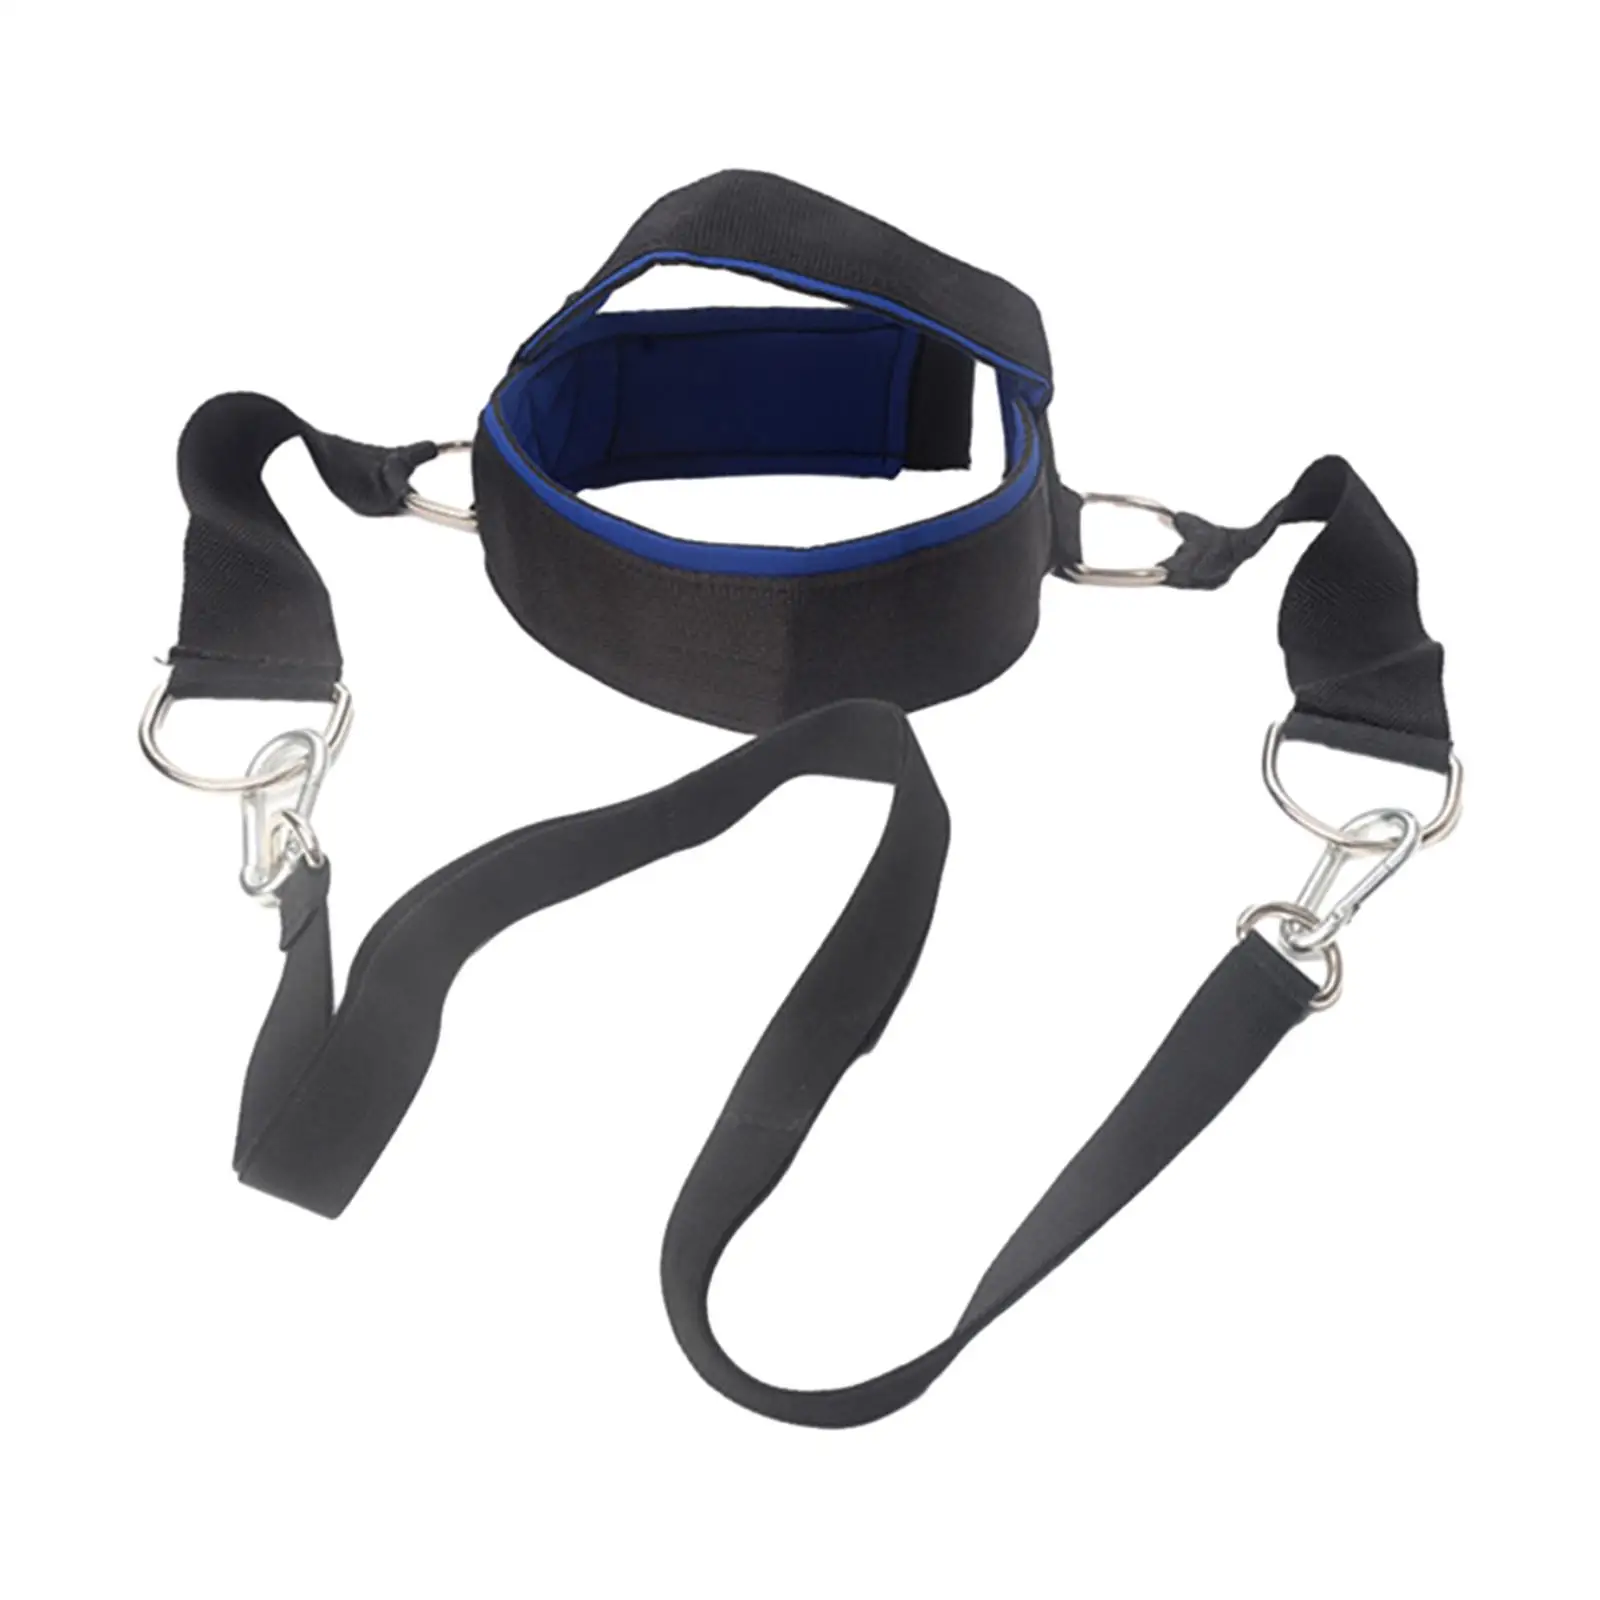 Head Harness Head Neck Training Exerciser Strength Exercise Strap for Weight Lifting MMA Exercises Powerlifting Muscle Builder